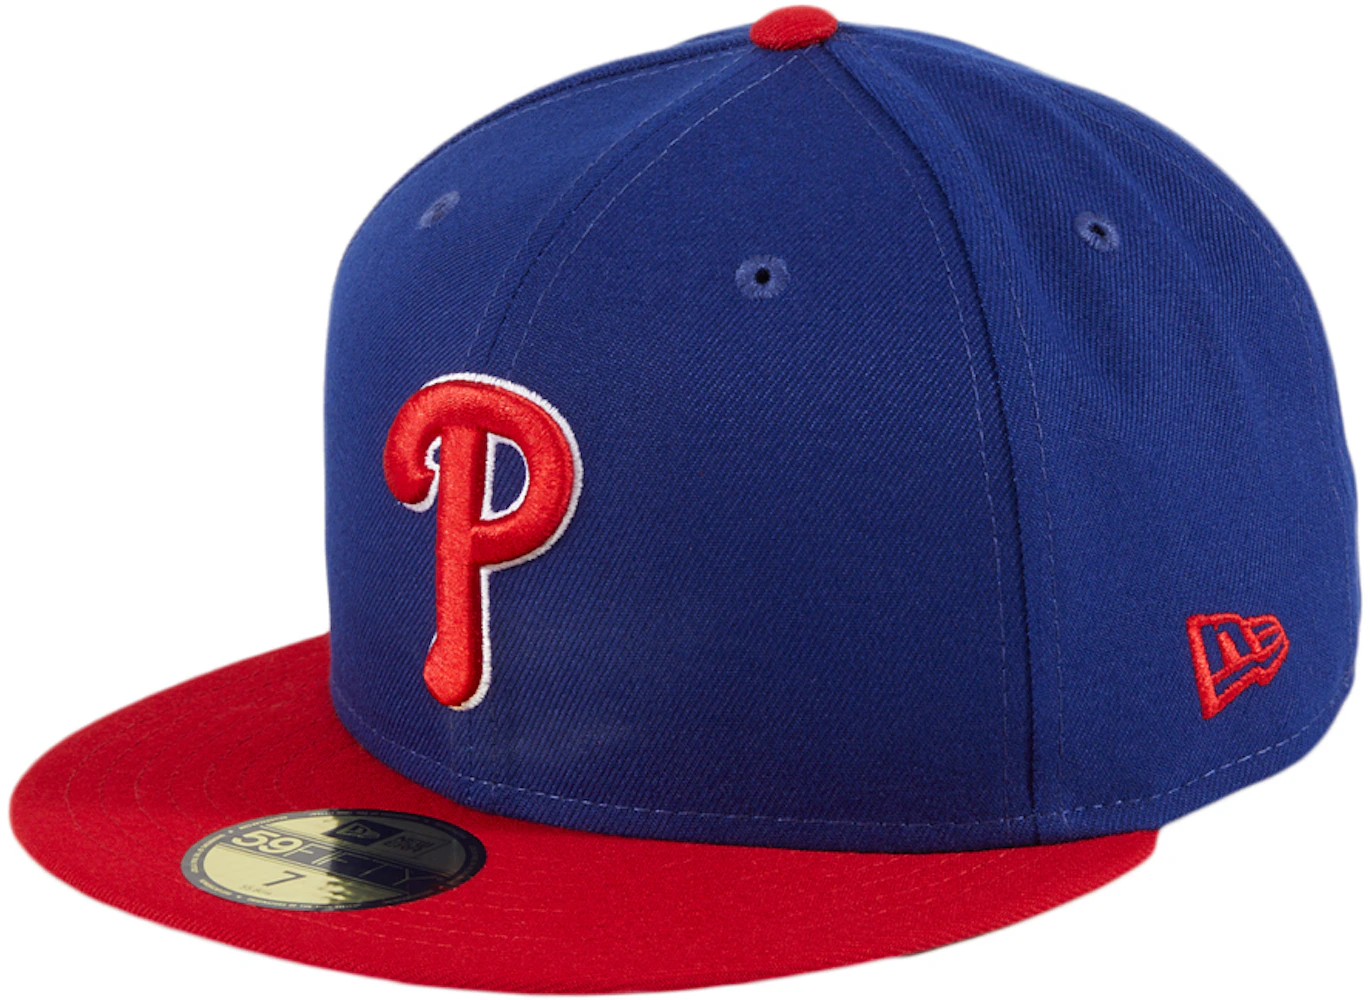 New Era 59FIFTY Philadelphia Phillies Game Authentic Collection on Field Fitted Hat Red